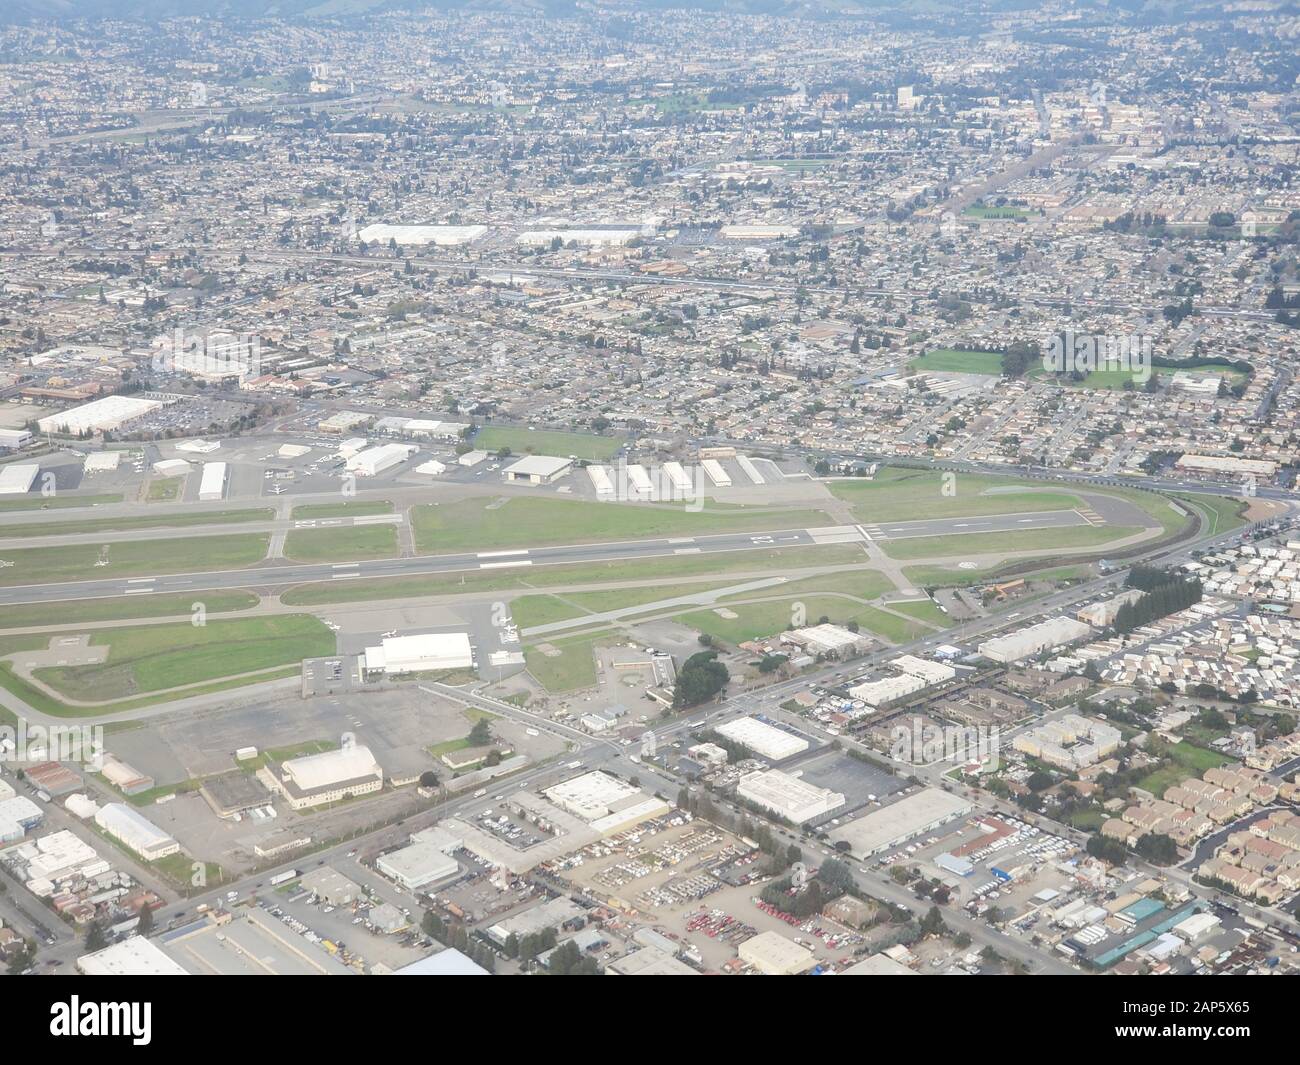 Hayward Execute Airport (HWD) is visible in an aerial view of the East Bay region of the San Francisco Bay area, Hayward, California, January 8, 2020. () Stock Photo